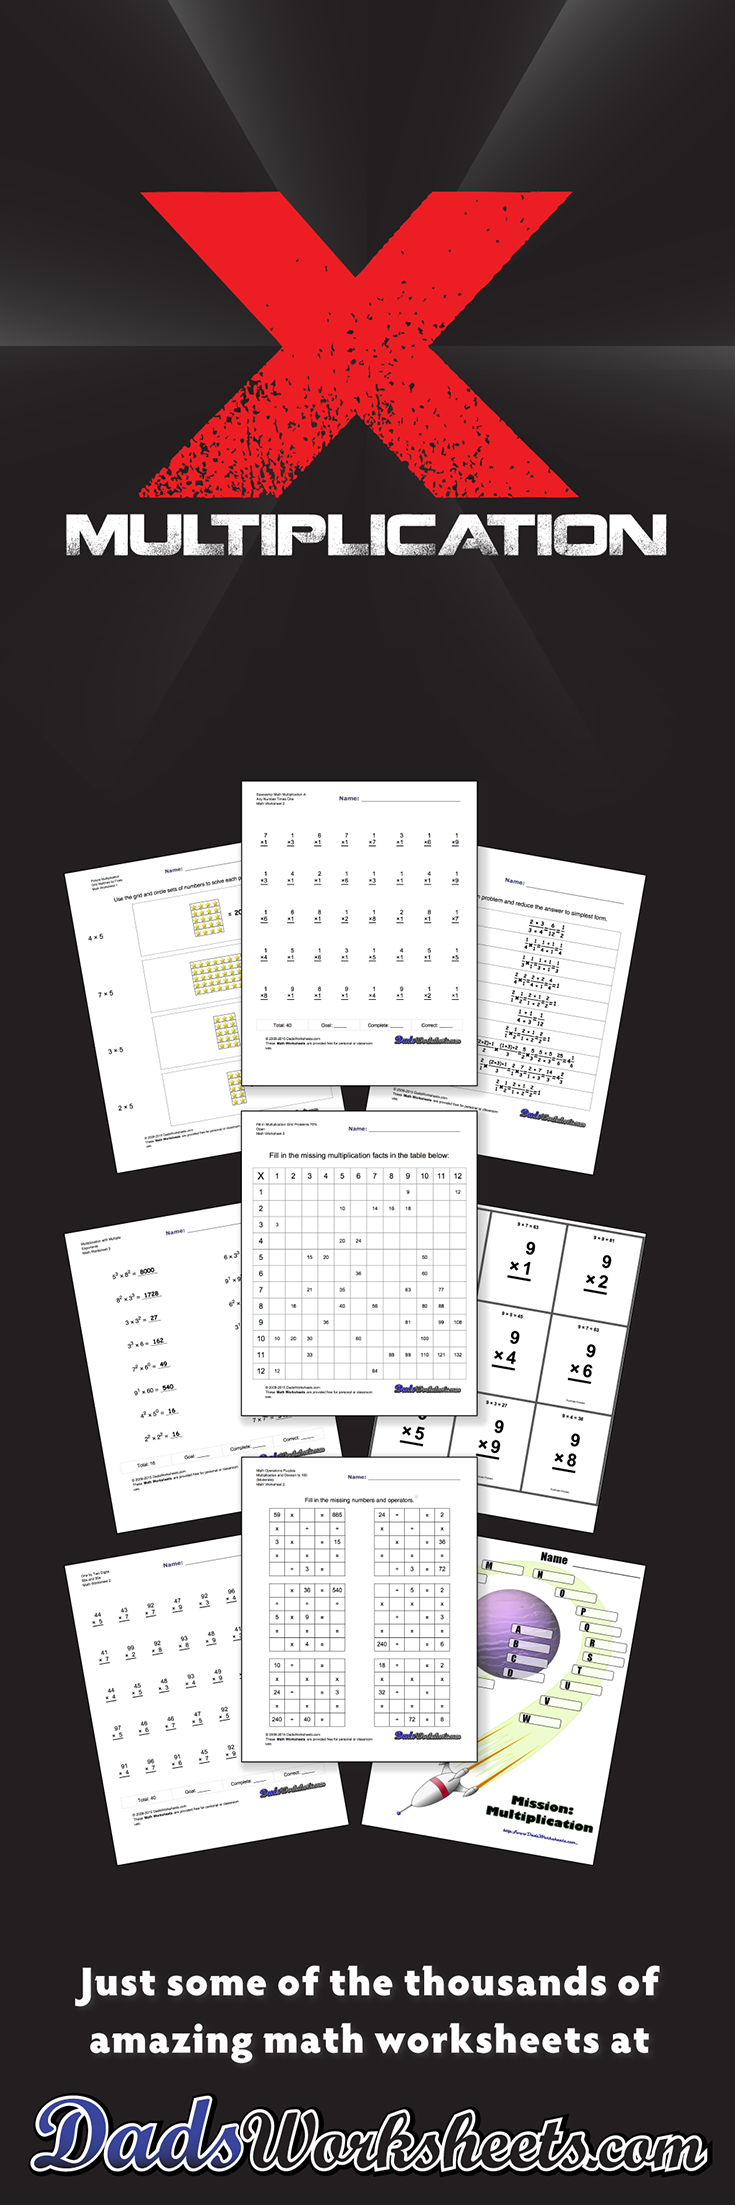 20-minute-multiplication-challenge-worksheet-1000-images-about-multiplication-facts-on